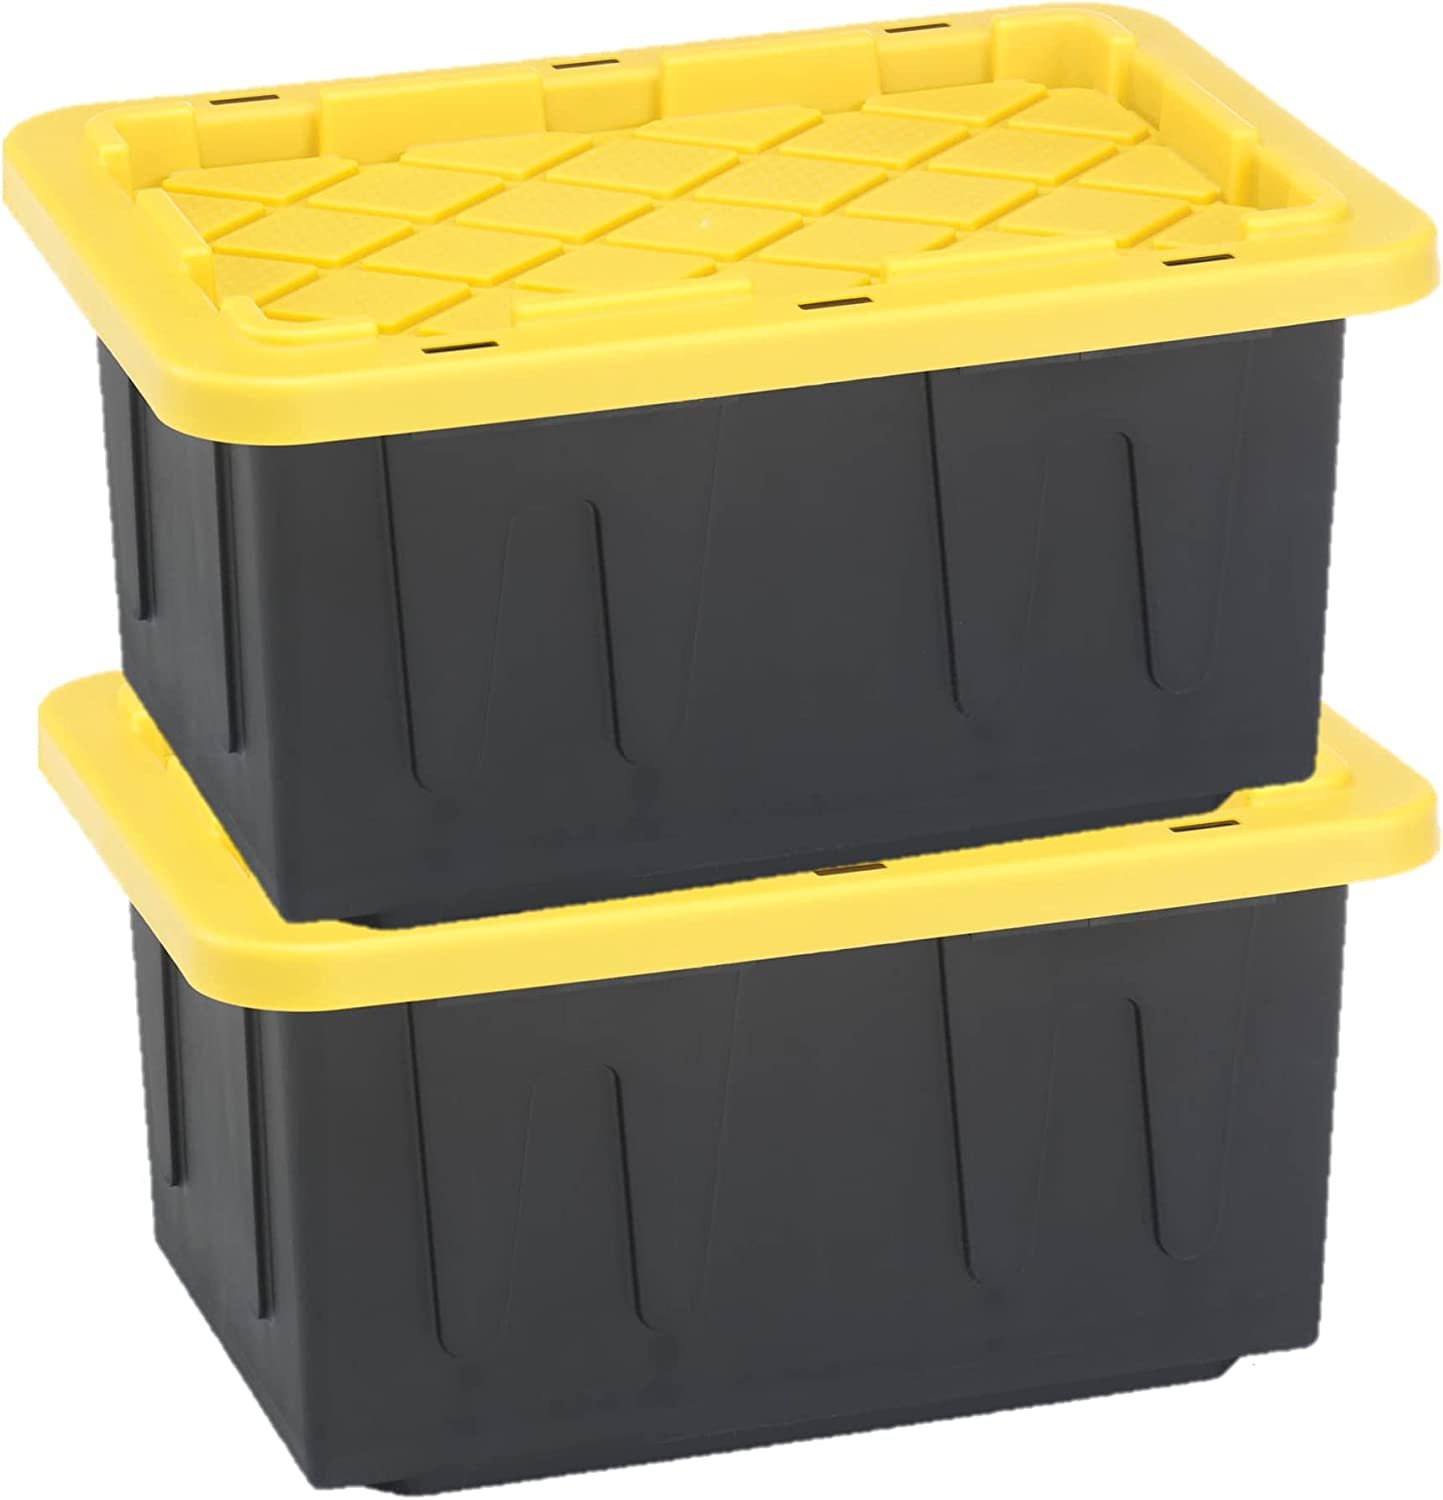 Homz 15 Gallon Durable Storage Bins, Pack Of 2 Strong Plastic, Organizing Totes. - $71.97